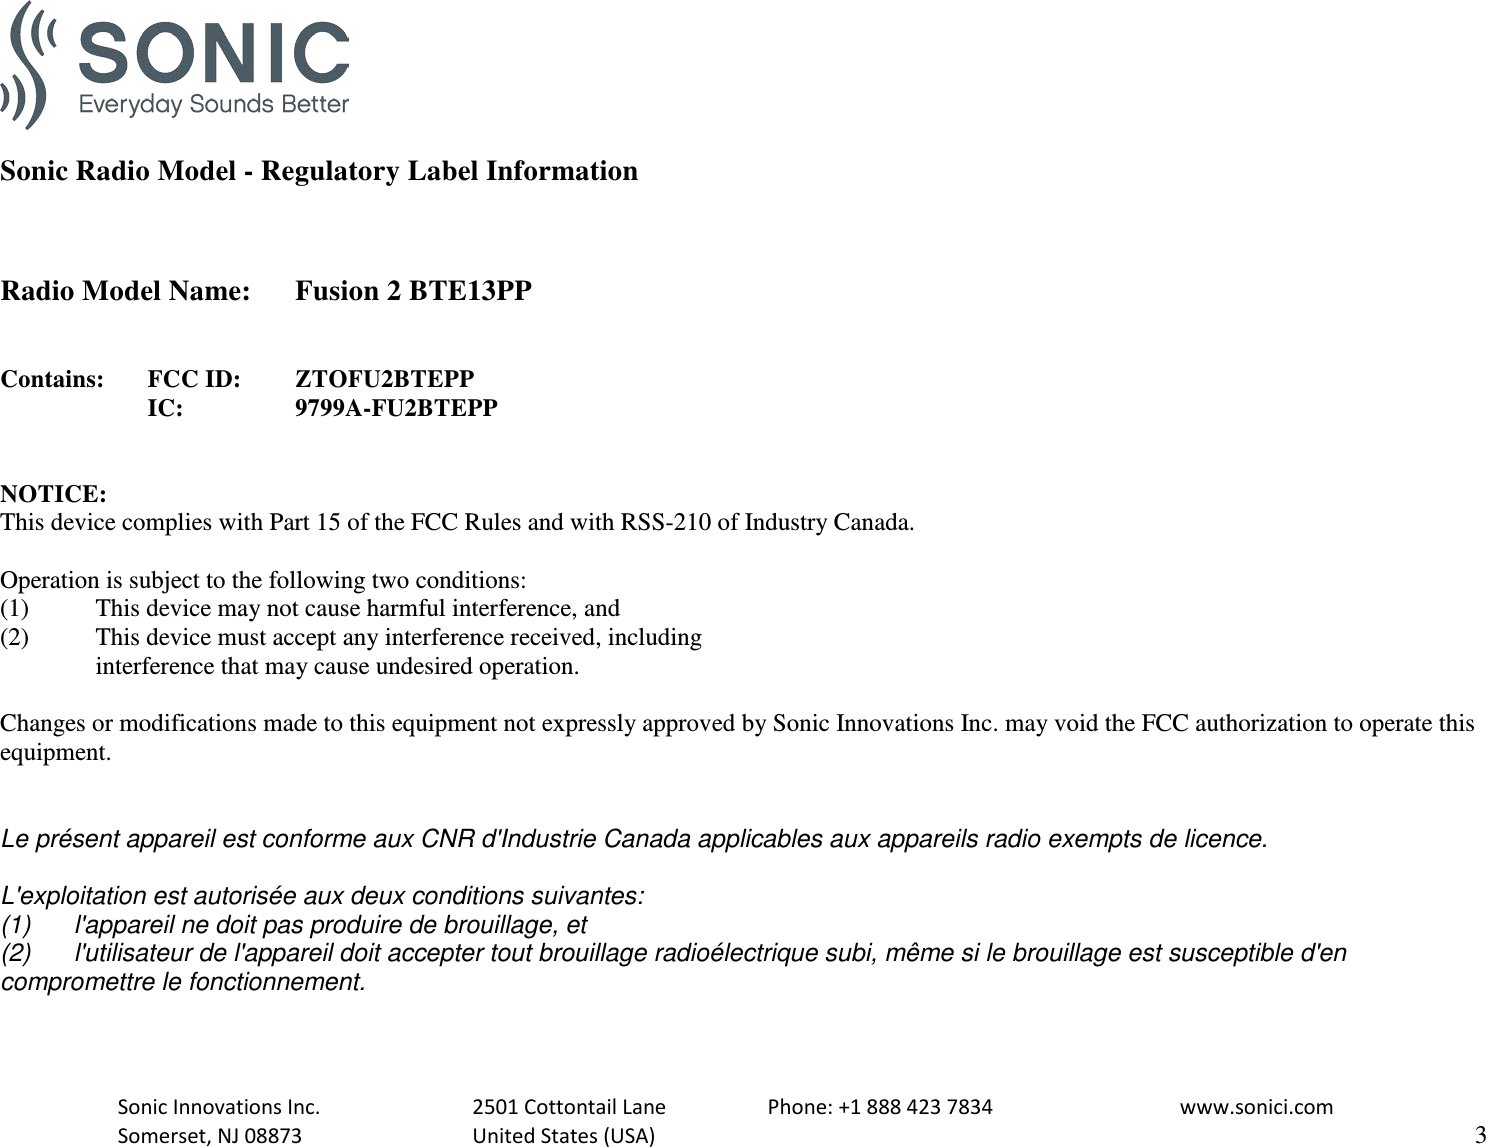   Sonic Radio Model - Regulatory Label Information    Radio Model Name: Fusion 2 BTE13PP   Contains:  FCC ID:  ZTOFU2BTEPP      IC:    9799A-FU2BTEPP   NOTICE: This device complies with Part 15 of the FCC Rules and with RSS-210 of Industry Canada.  Operation is subject to the following two conditions: (1)   This device may not cause harmful interference, and (2)  This device must accept any interference received, including  interference that may cause undesired operation.  Changes or modifications made to this equipment not expressly approved by Sonic Innovations Inc. may void the FCC authorization to operate this equipment.   Le présent appareil est conforme aux CNR d&apos;Industrie Canada applicables aux appareils radio exempts de licence.  L&apos;exploitation est autorisée aux deux conditions suivantes: (1) l&apos;appareil ne doit pas produire de brouillage, et  (2) l&apos;utilisateur de l&apos;appareil doit accepter tout brouillage radioélectrique subi, même si le brouillage est susceptible d&apos;en compromettre le fonctionnement.   Sonic Innovations Inc.    2501 Cottontail Lane    Phone: +1 888 423 7834   www.sonici.com  Somerset, NJ 08873    United States (USA)                     3  